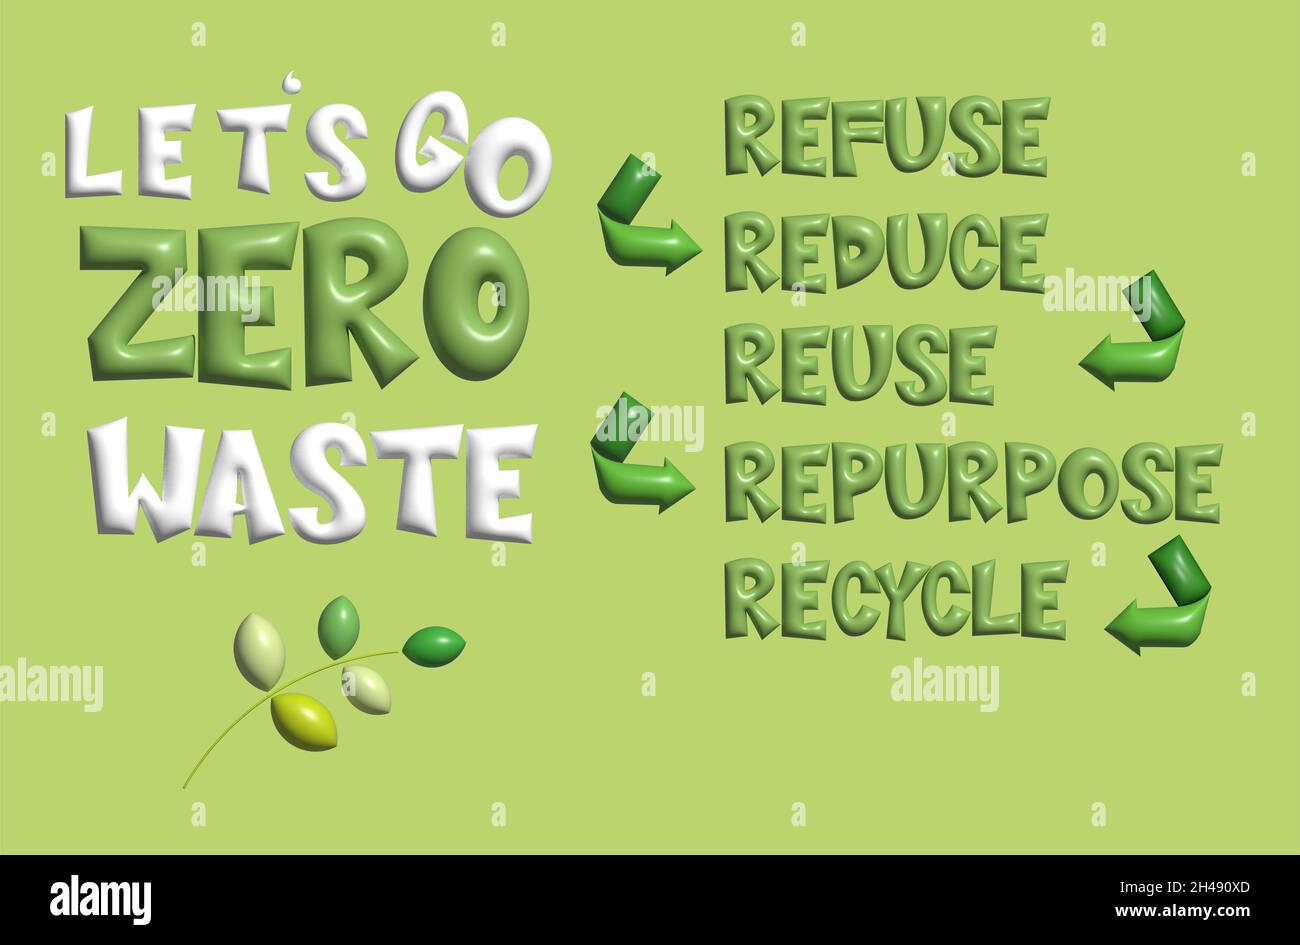 Reduce reuse recycle sign hi-res stock photography and images - Alamy